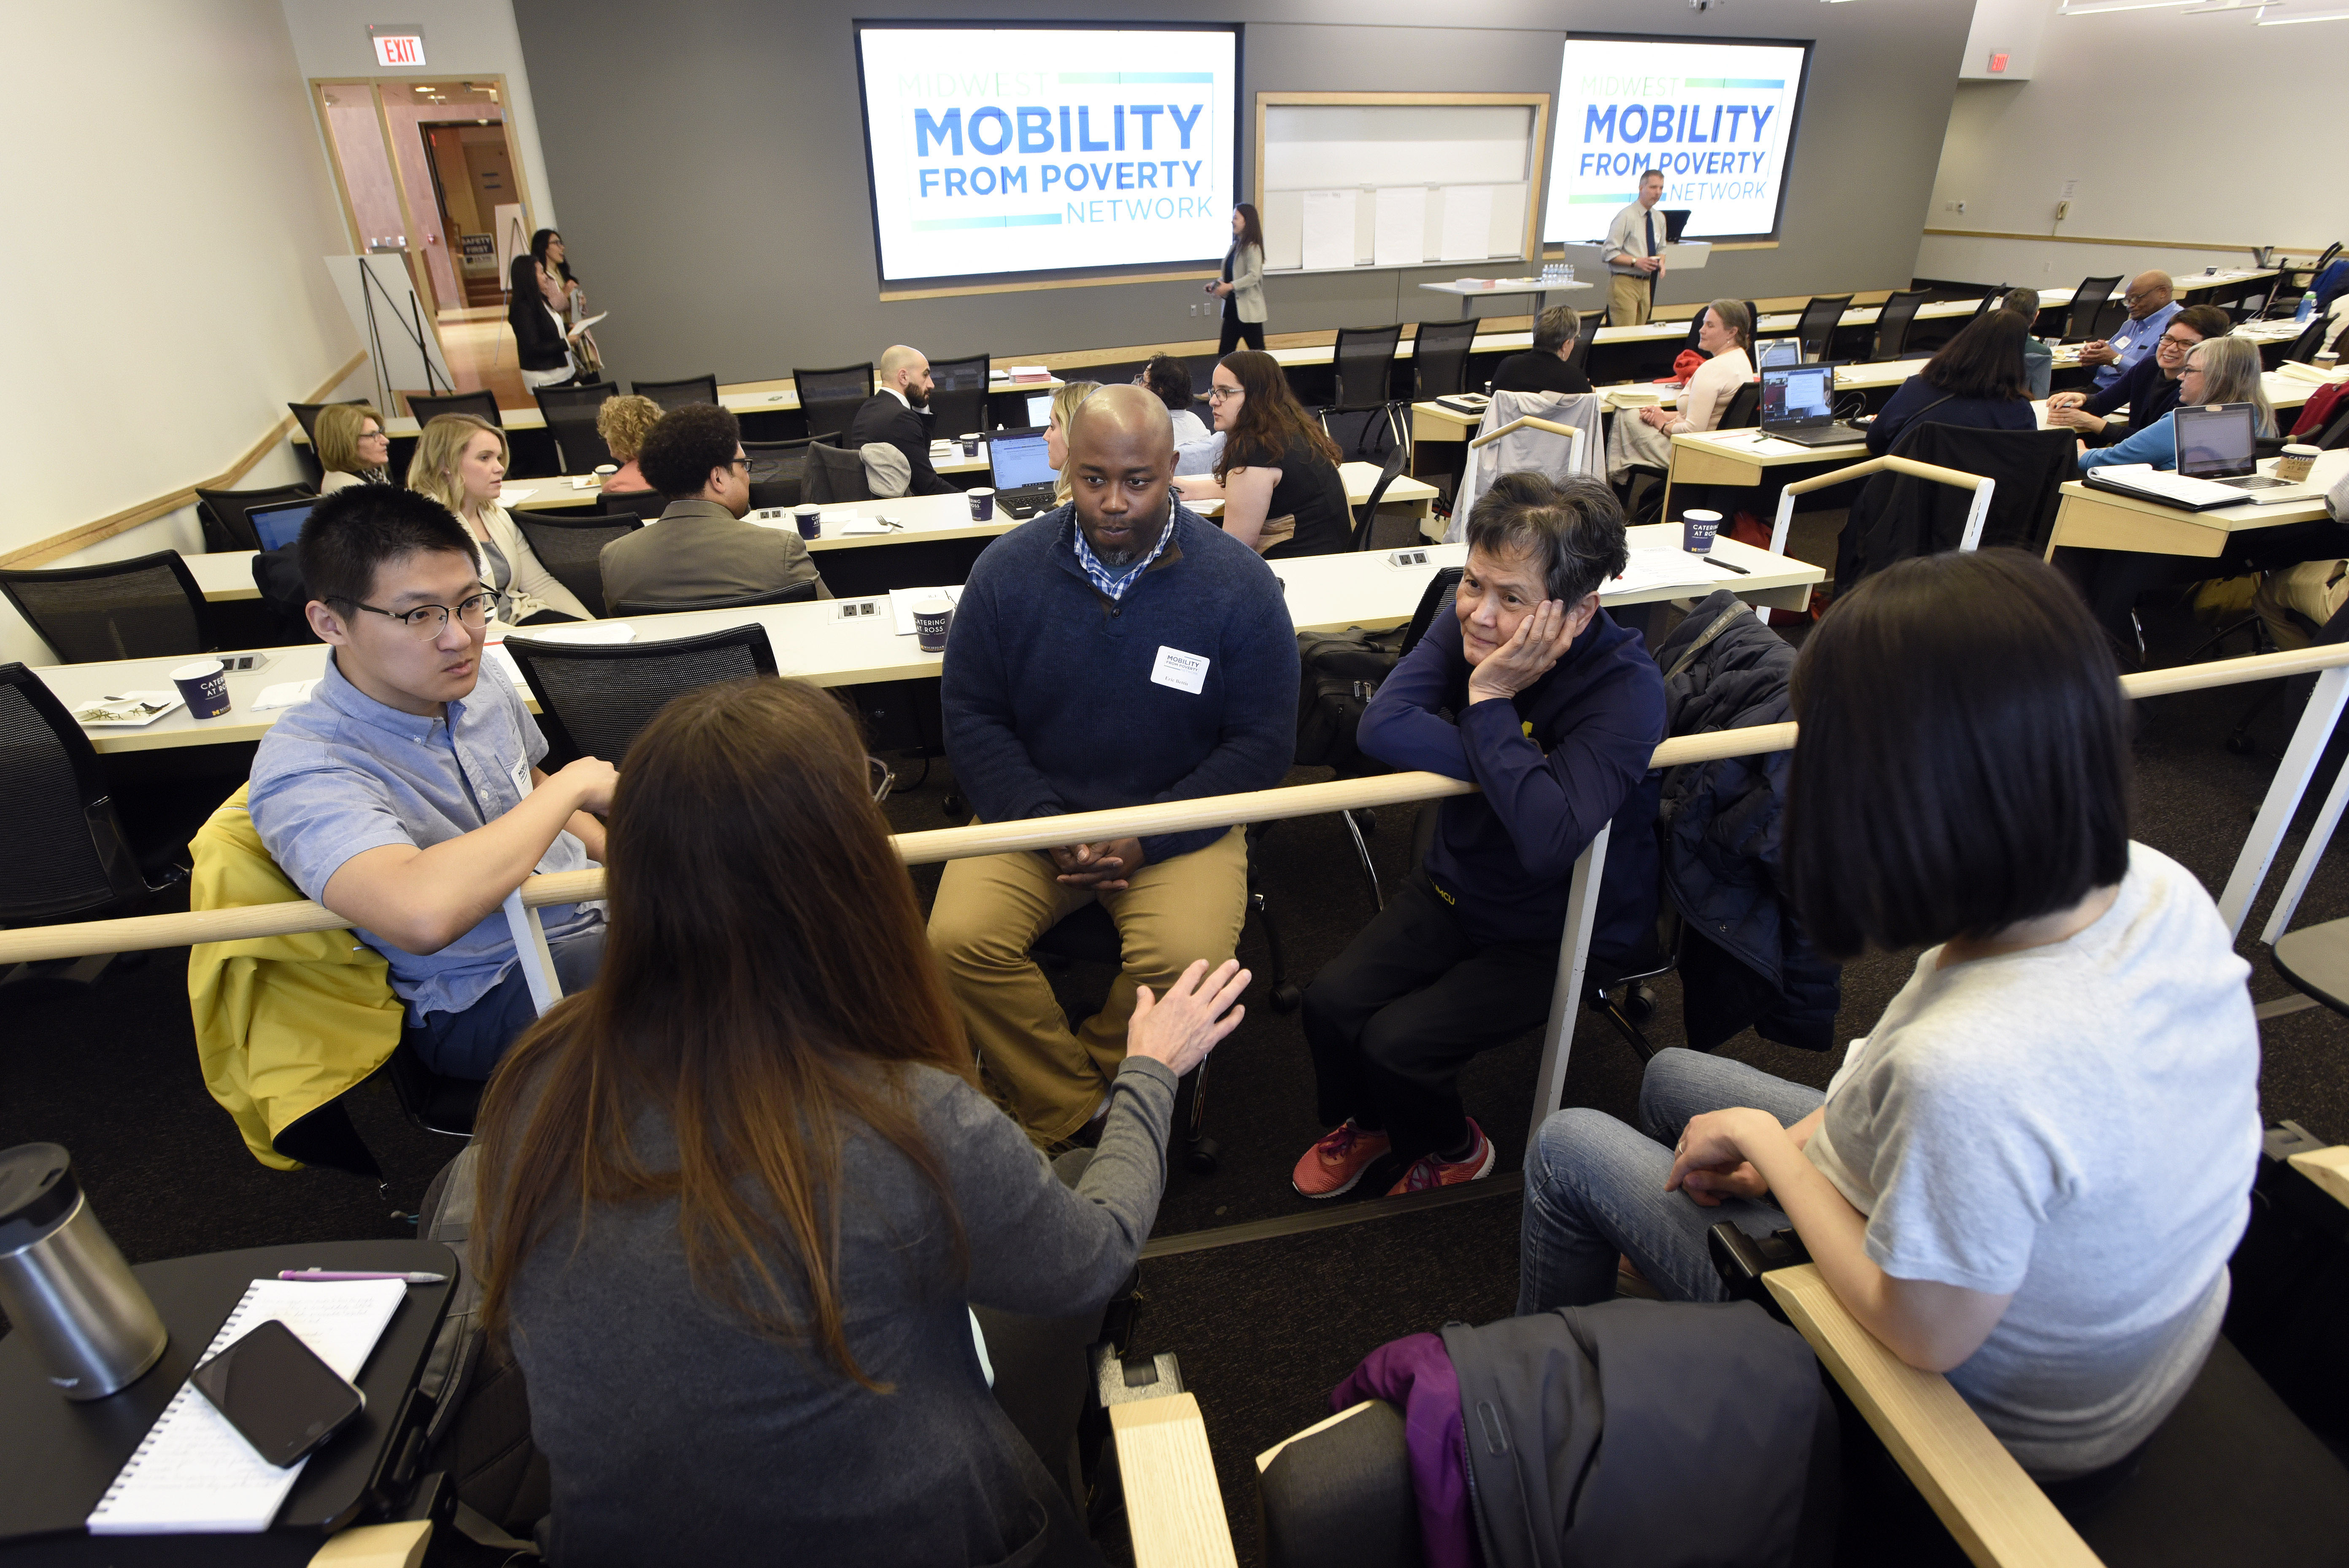 A group of people talking in a meeting room with a slide with the words "Mobility From Poverty Network" projected on screens at the front of the room